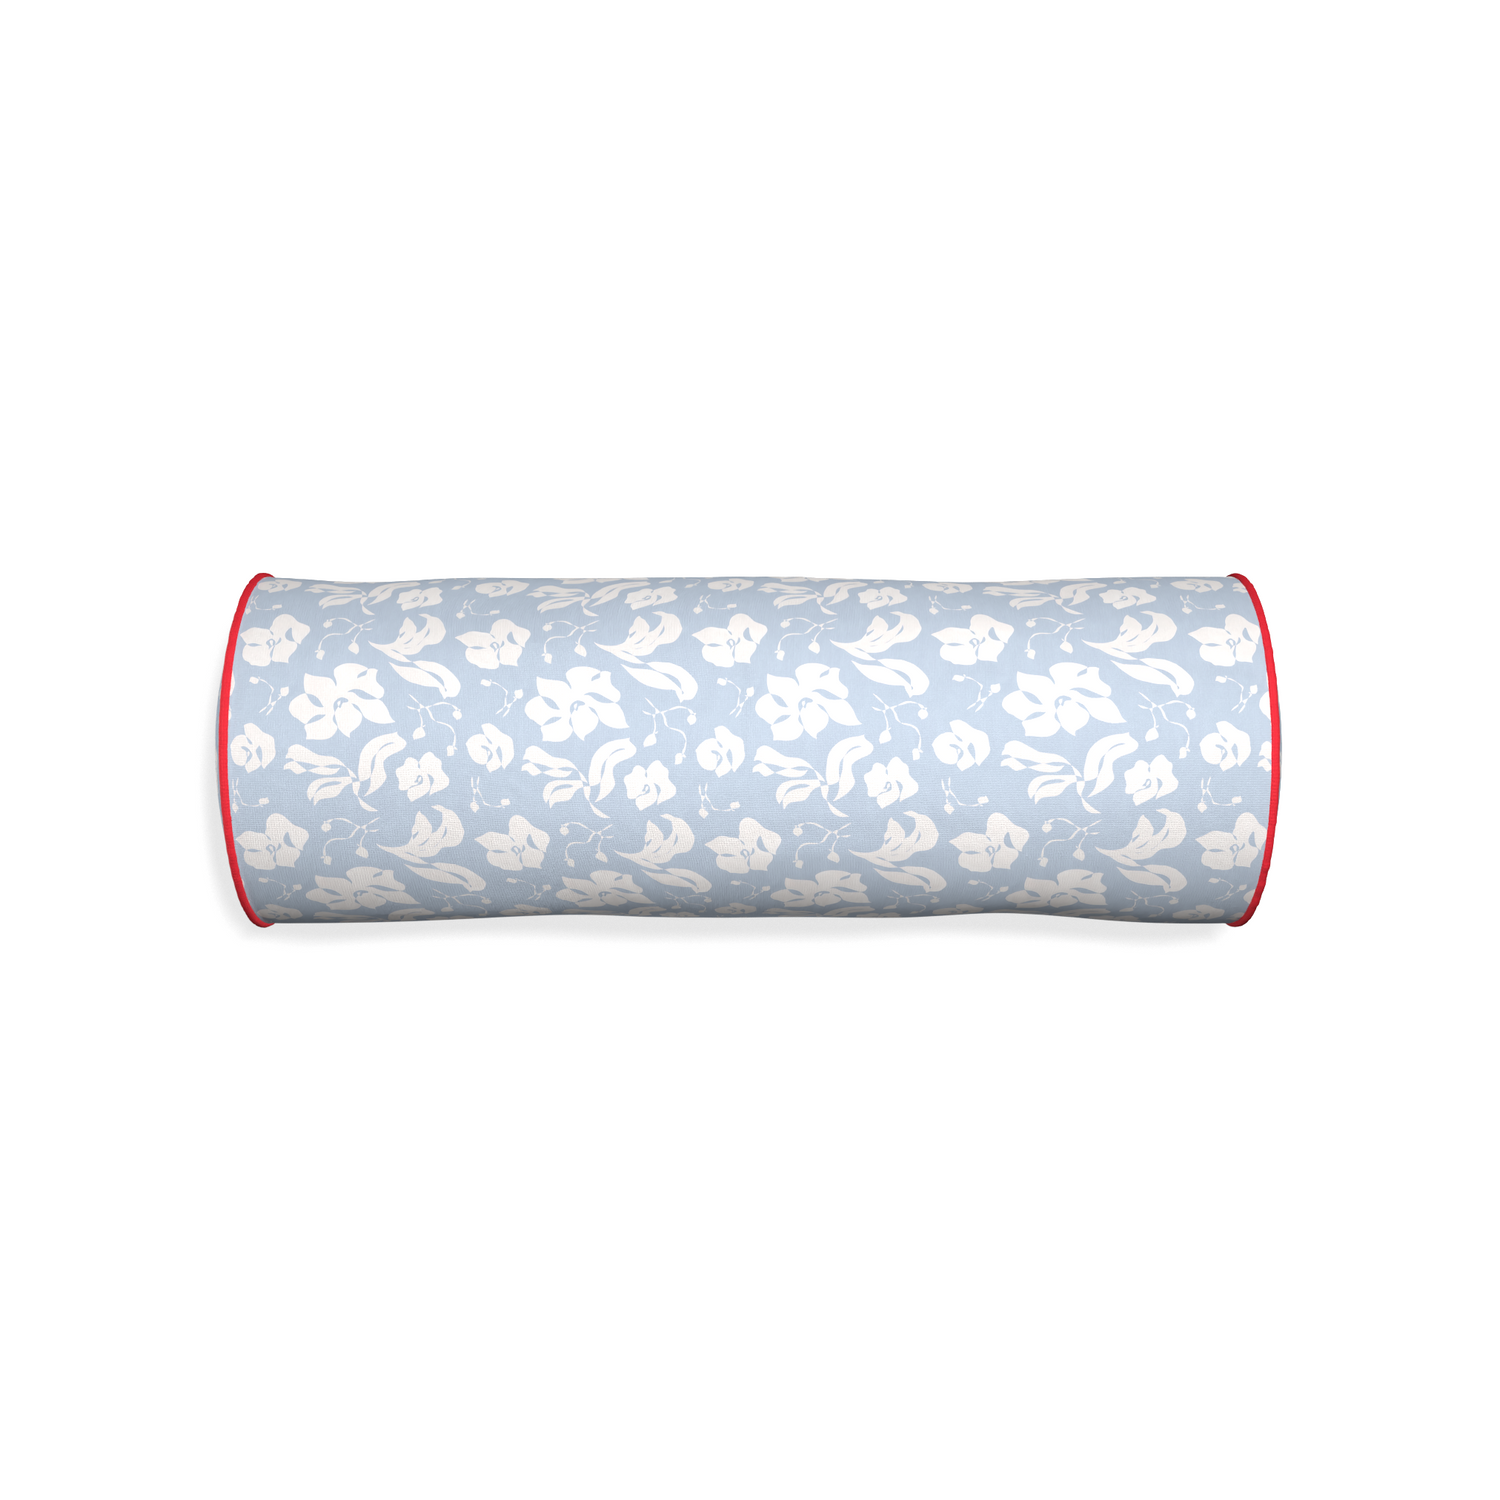 Bolster georgia custom cornflower blue floralpillow with cherry piping on white background